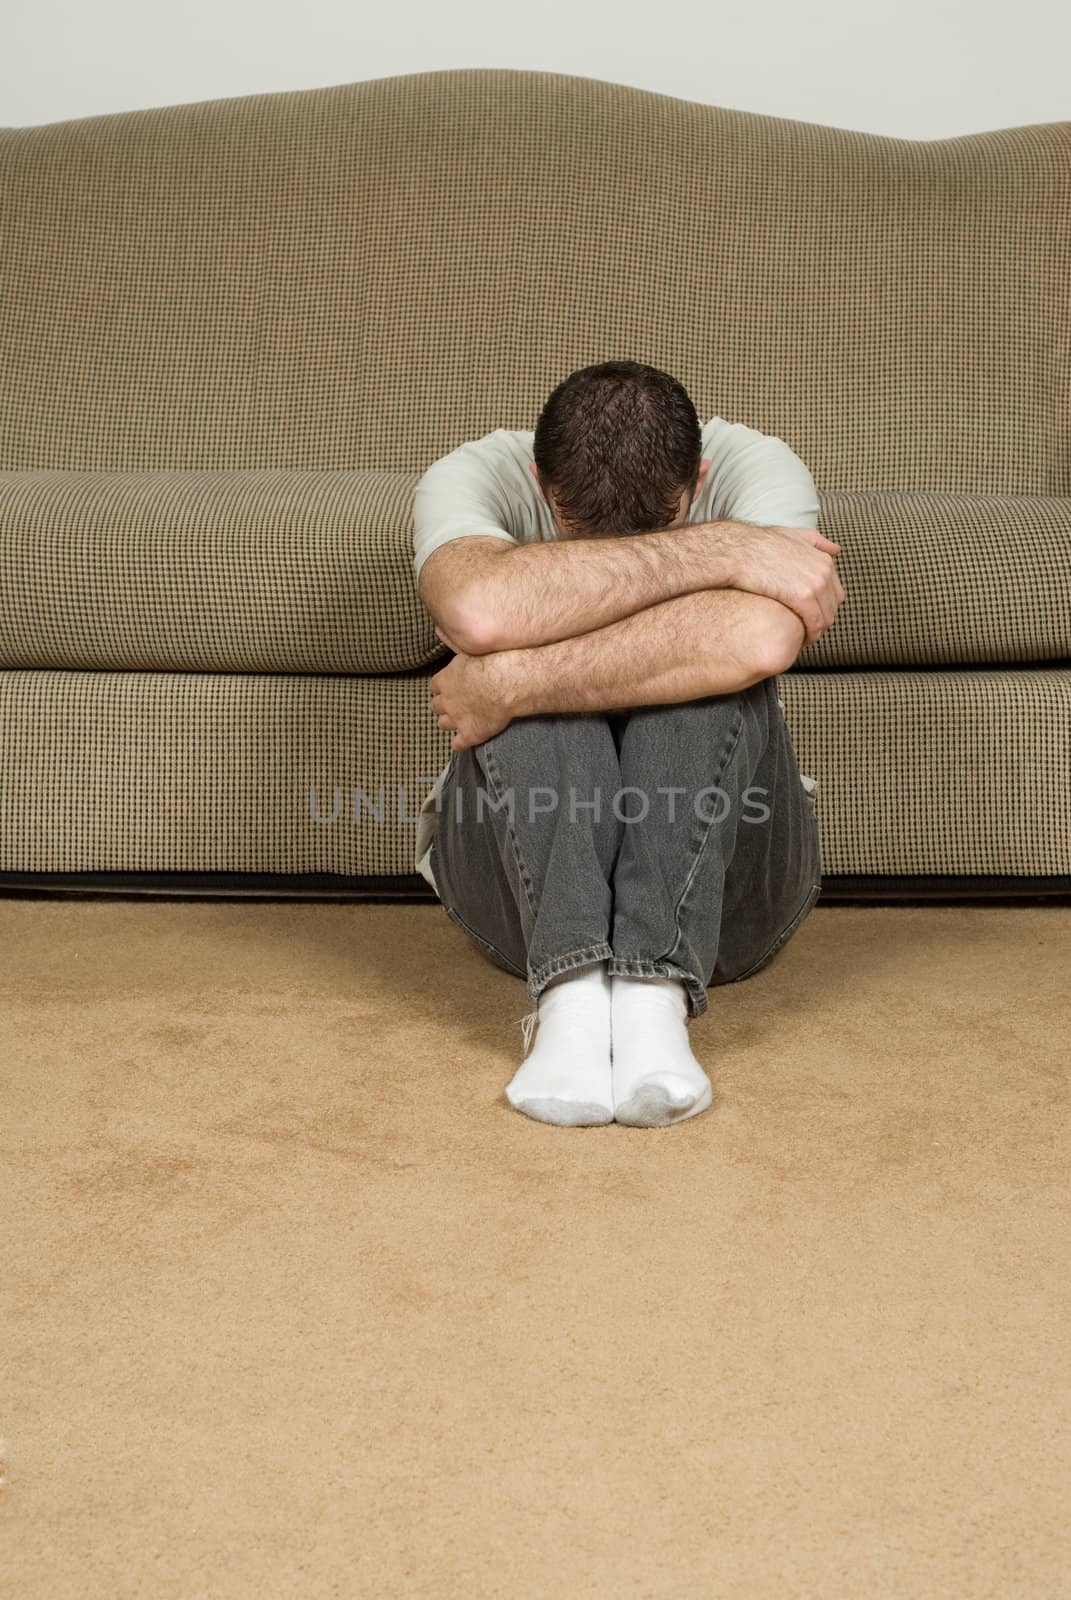 A depressed man hiding his face while sitting on the floor